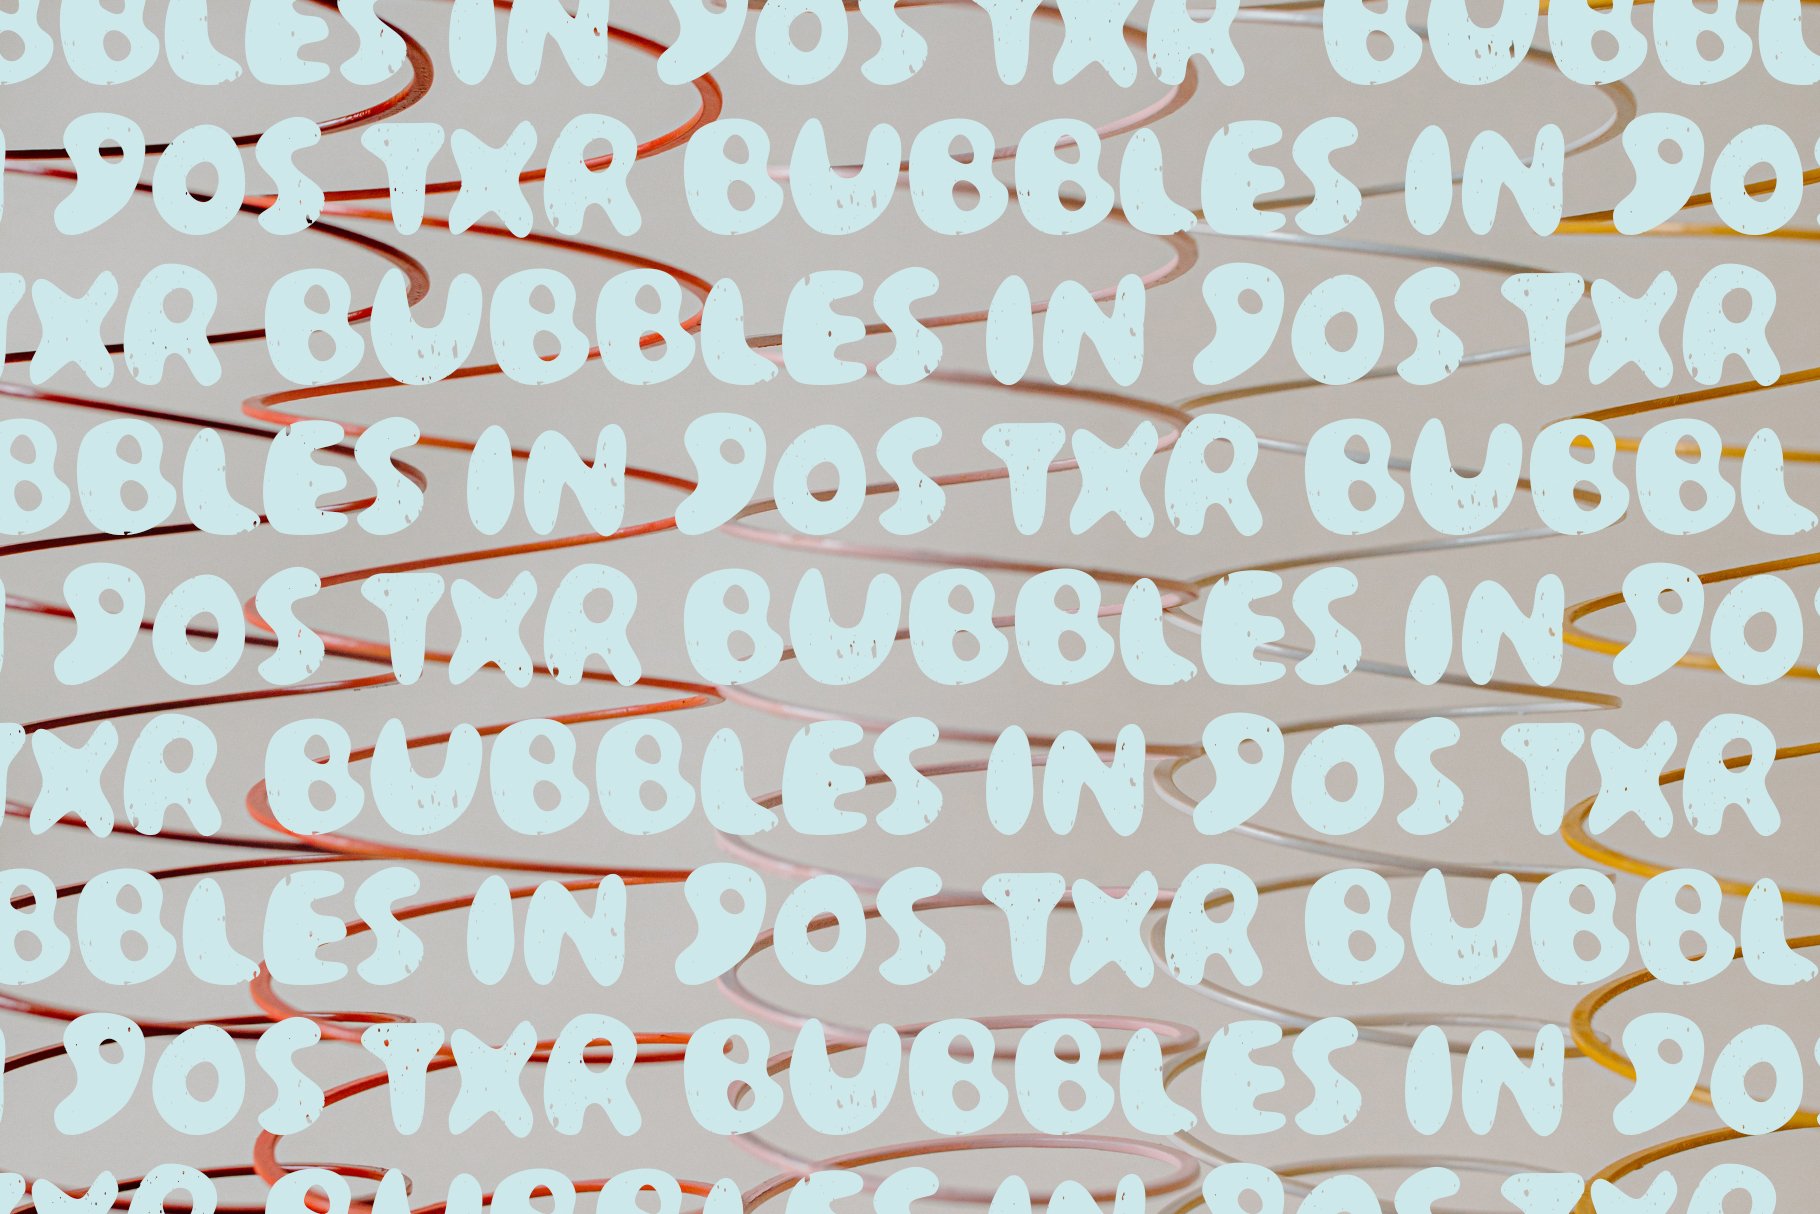 nineties 90s grunge textured bubbles font 852